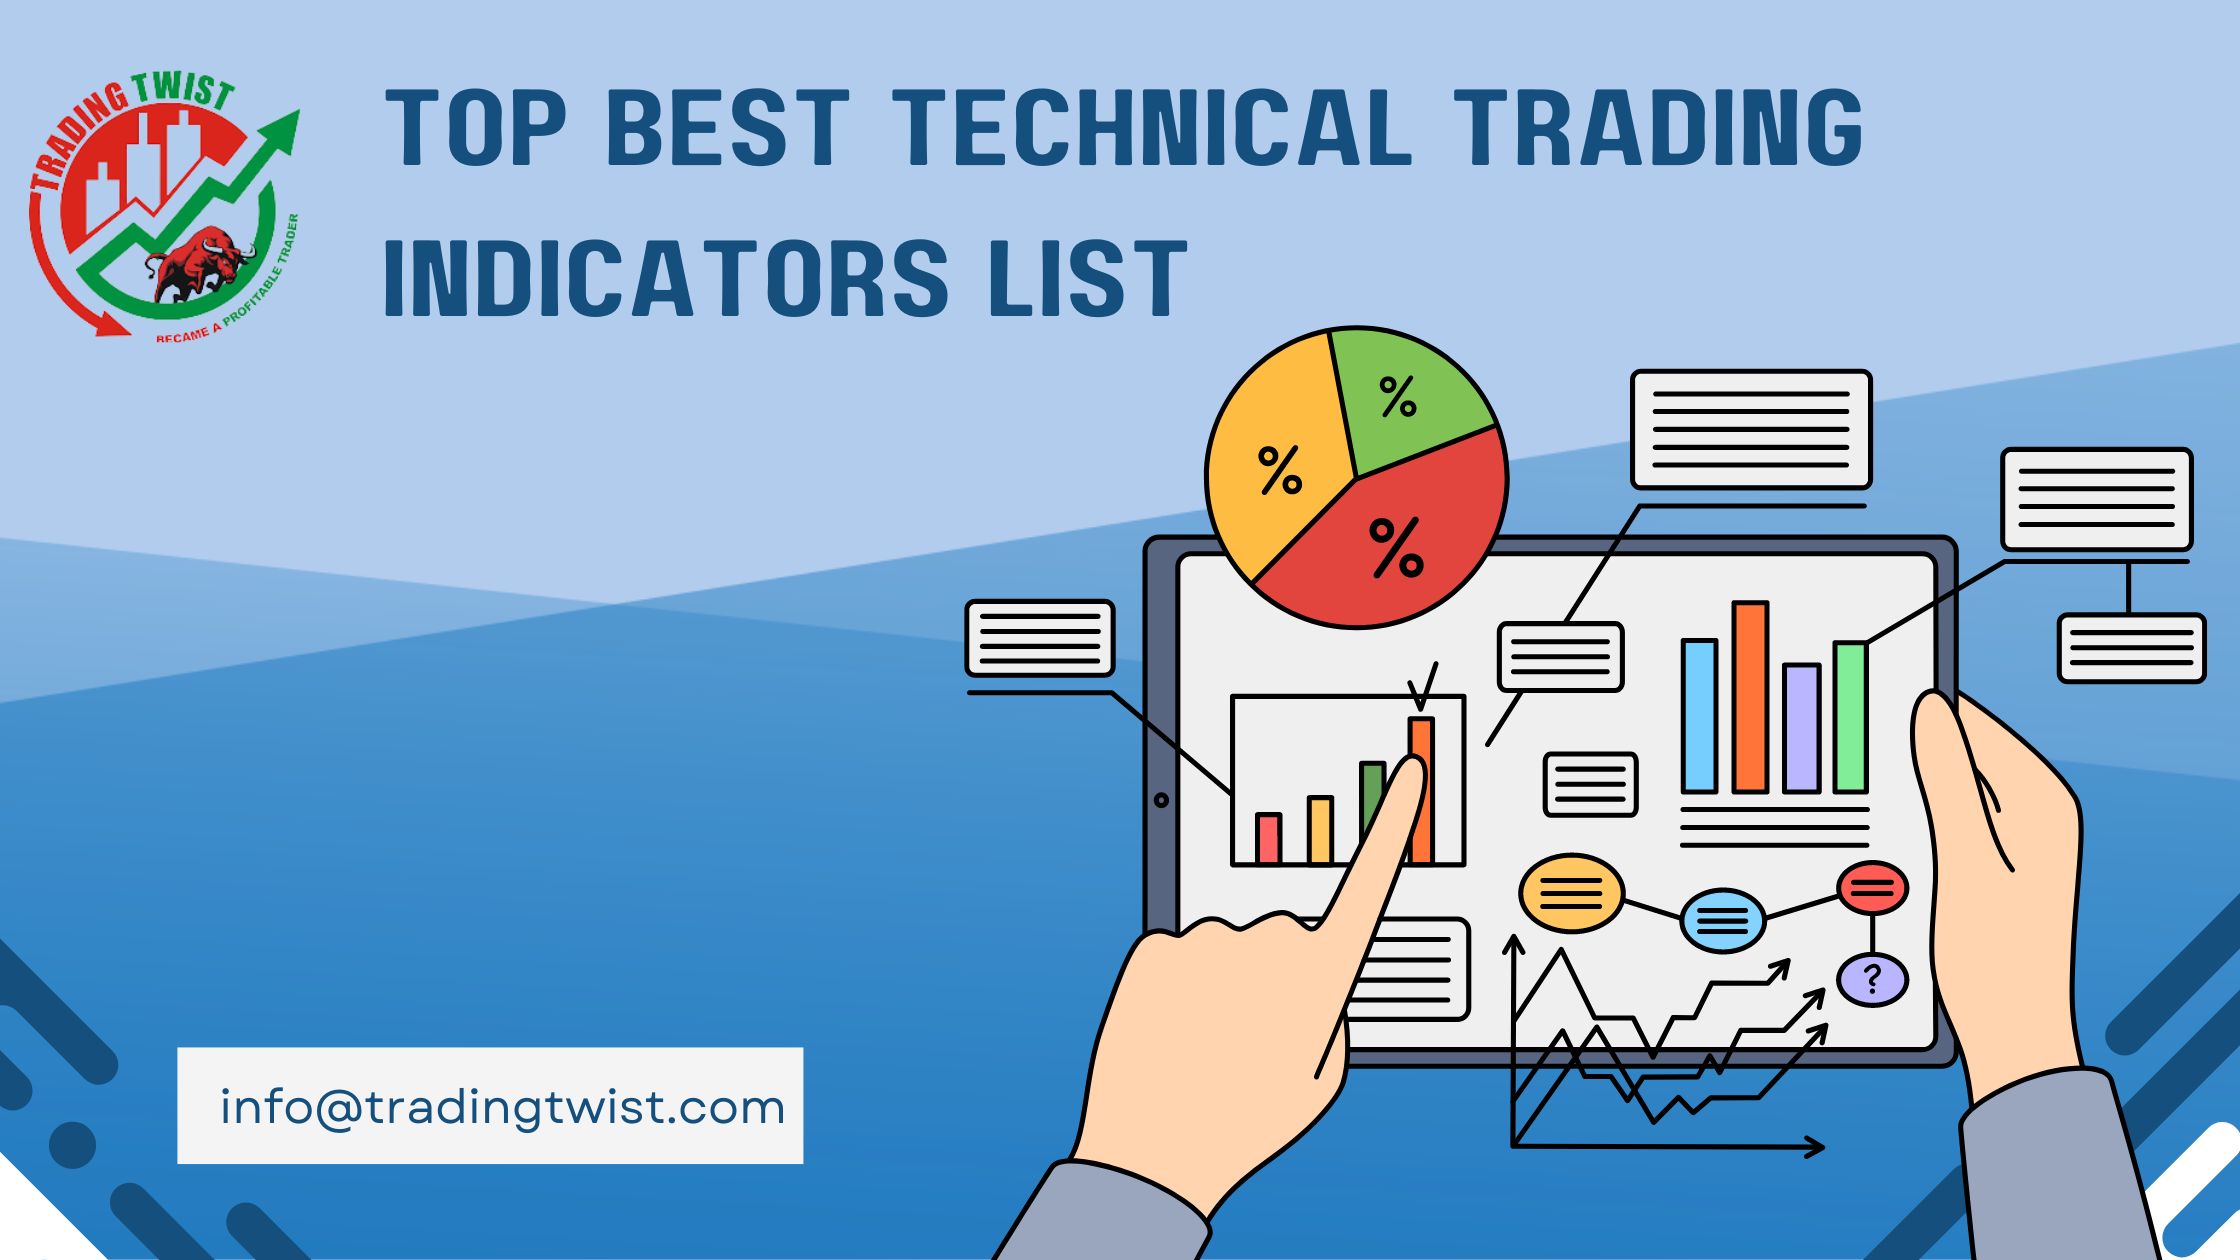 Top Best Technical Trading Indicator List